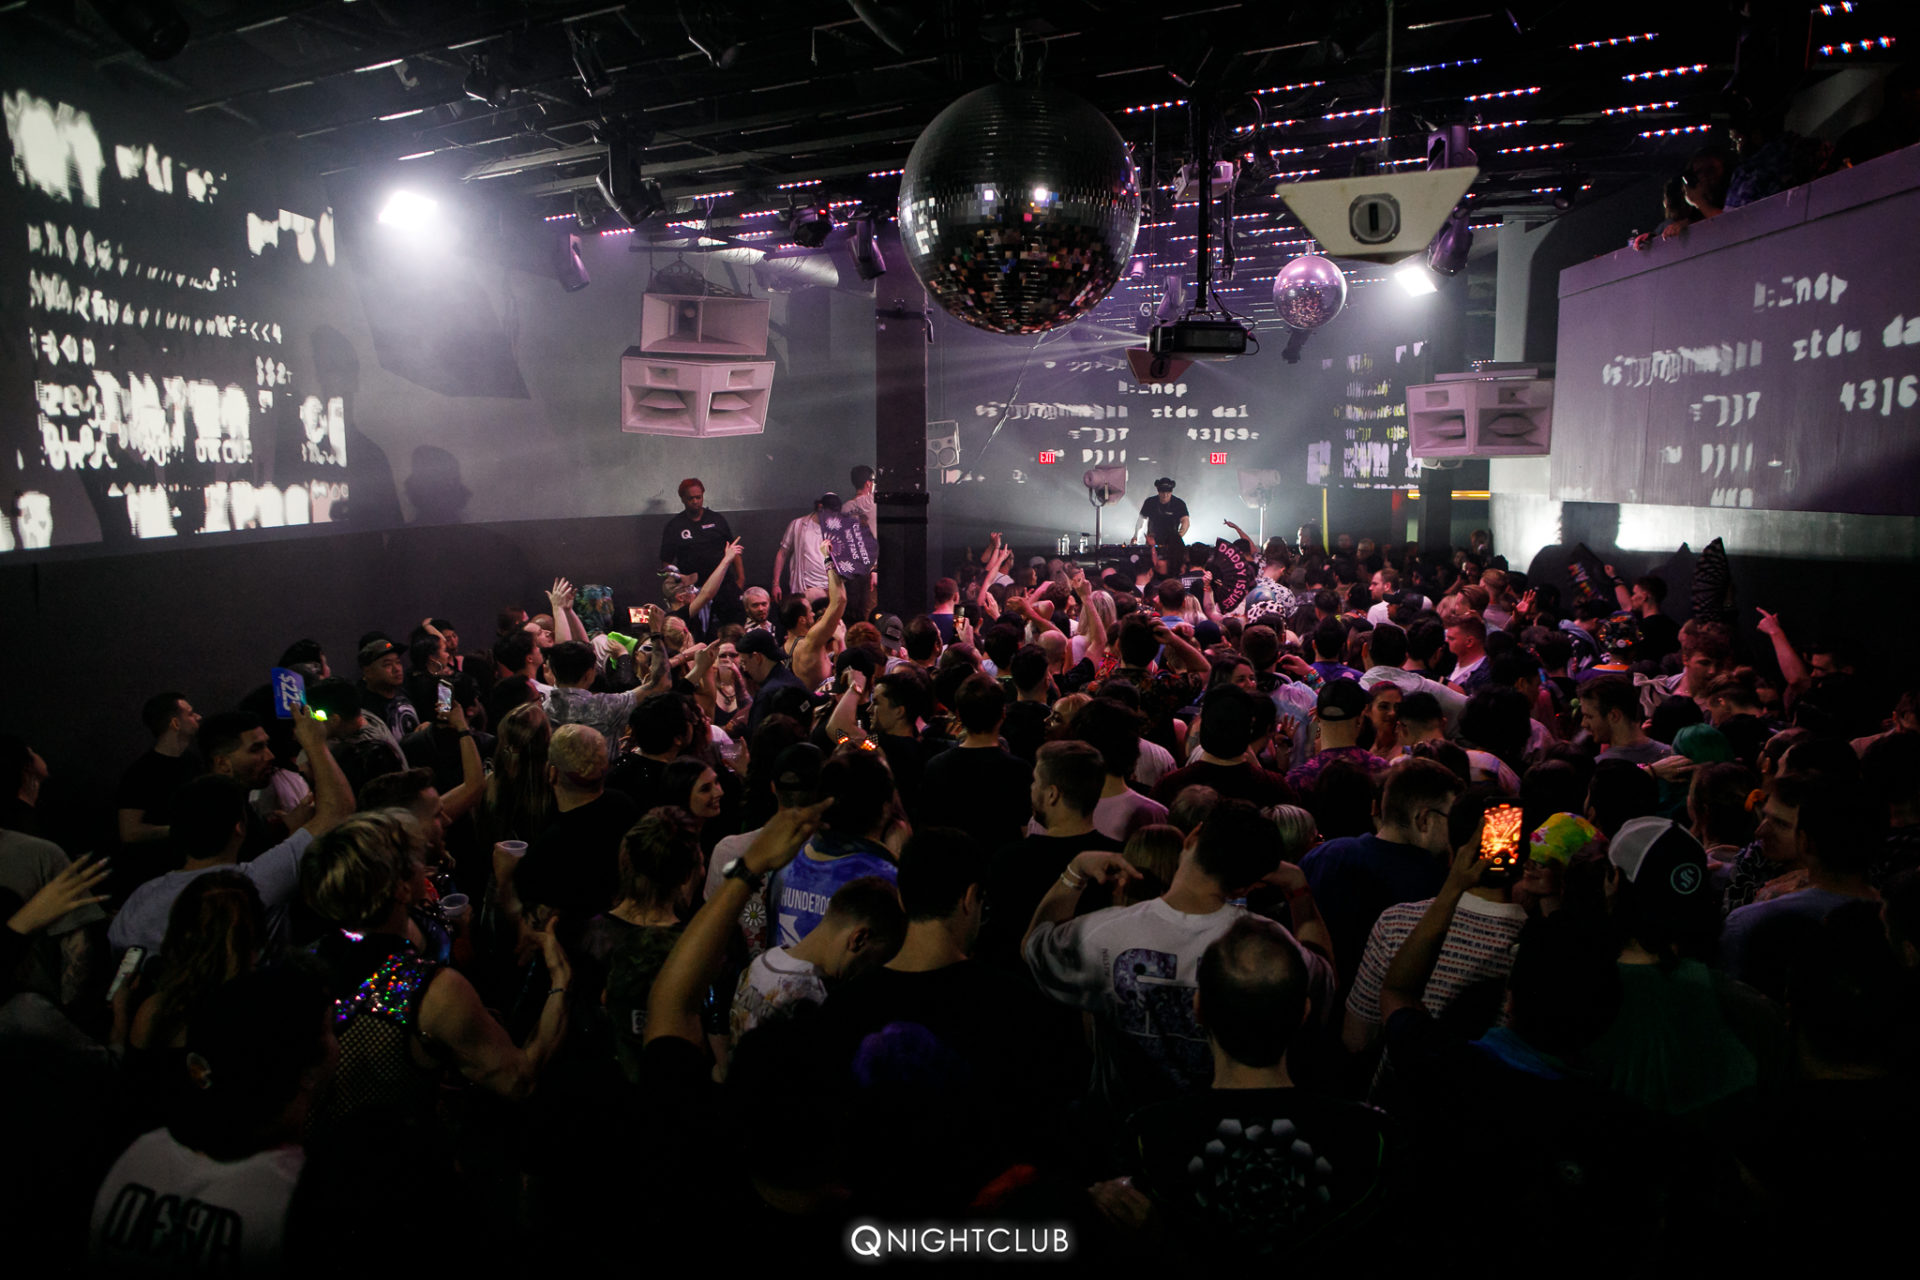 Dr Fresch at Q Nightclub 4/28/23 with sold out crowd